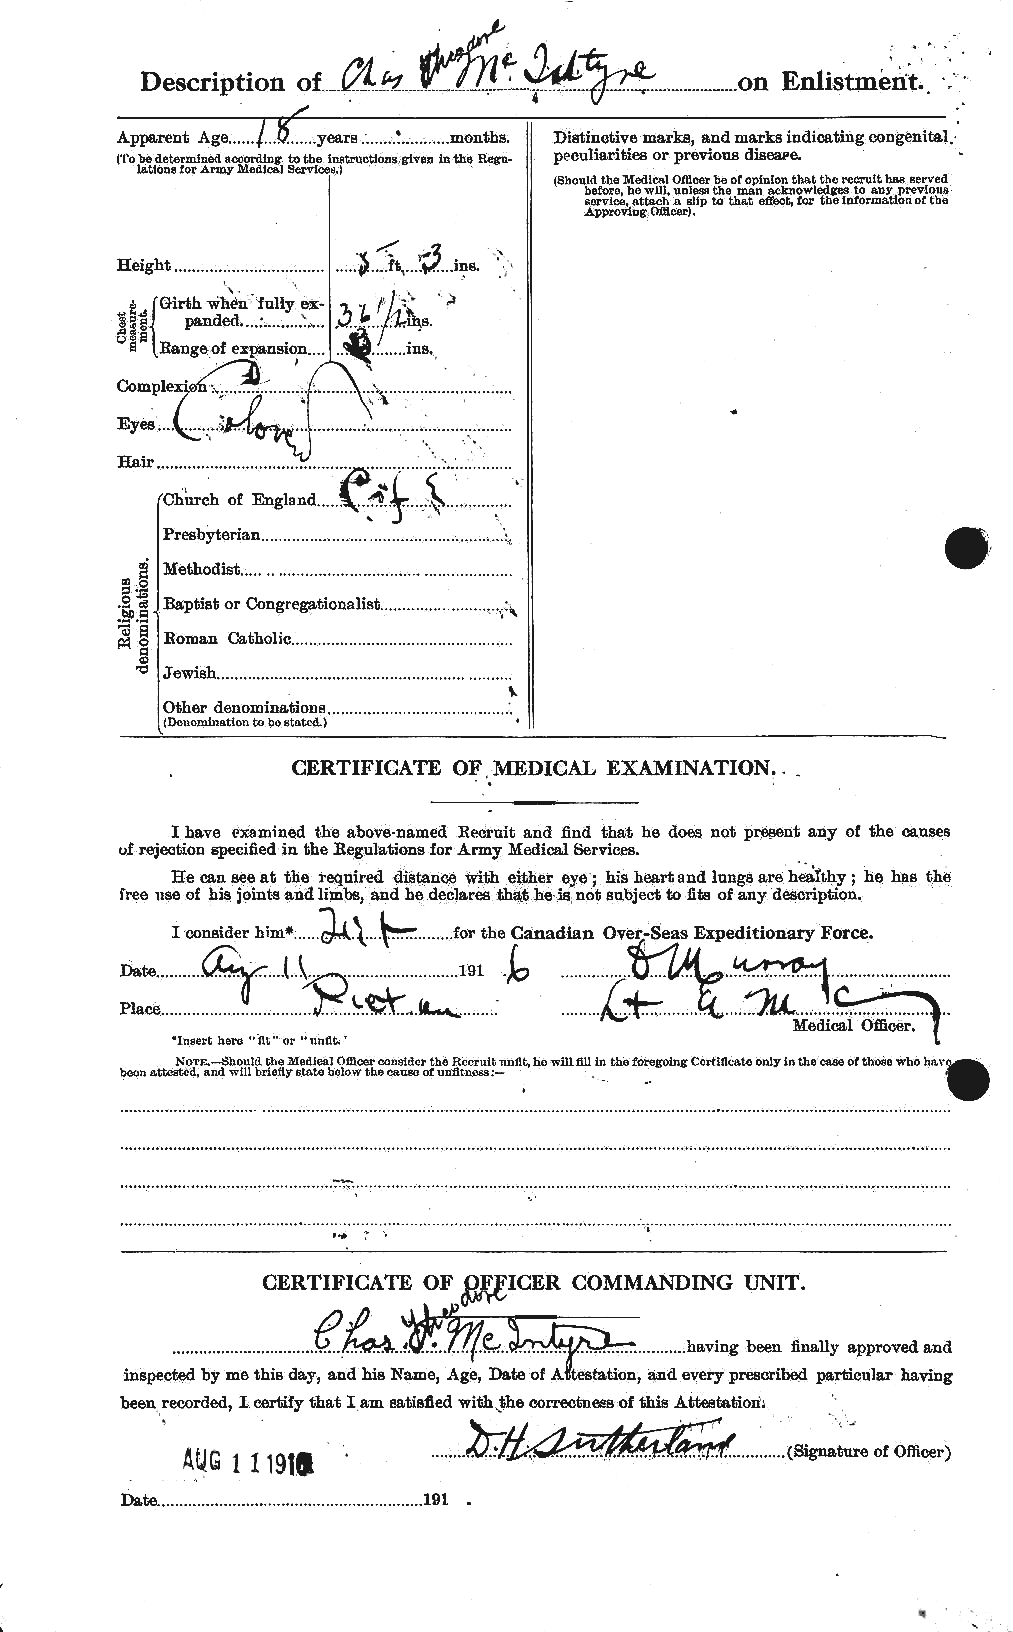 Personnel Records of the First World War - CEF 527277b